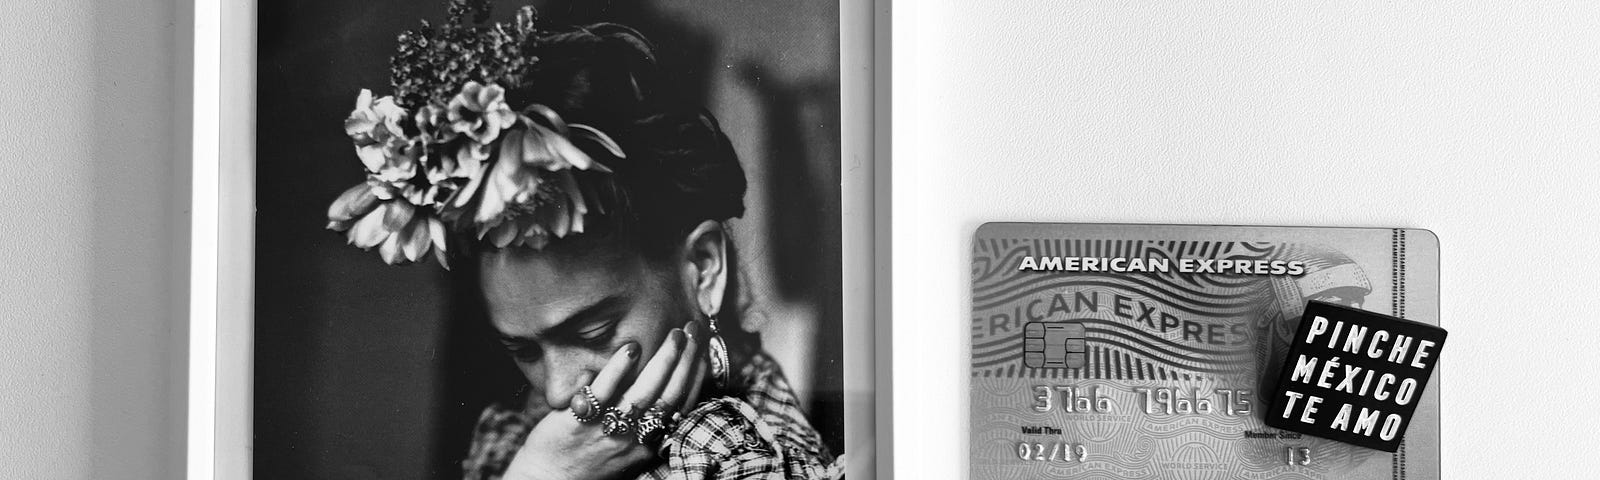 On the left, is a black and white picture of the Mexican painter Frida Kahlo. On the right side, my Platinum American Express credit card with my misspelt name (Isabella is missing one L). A black square with the white words “PINCHE MÉXICO TE AMO” is on top of the credit card, covering its last digits and the PIN.